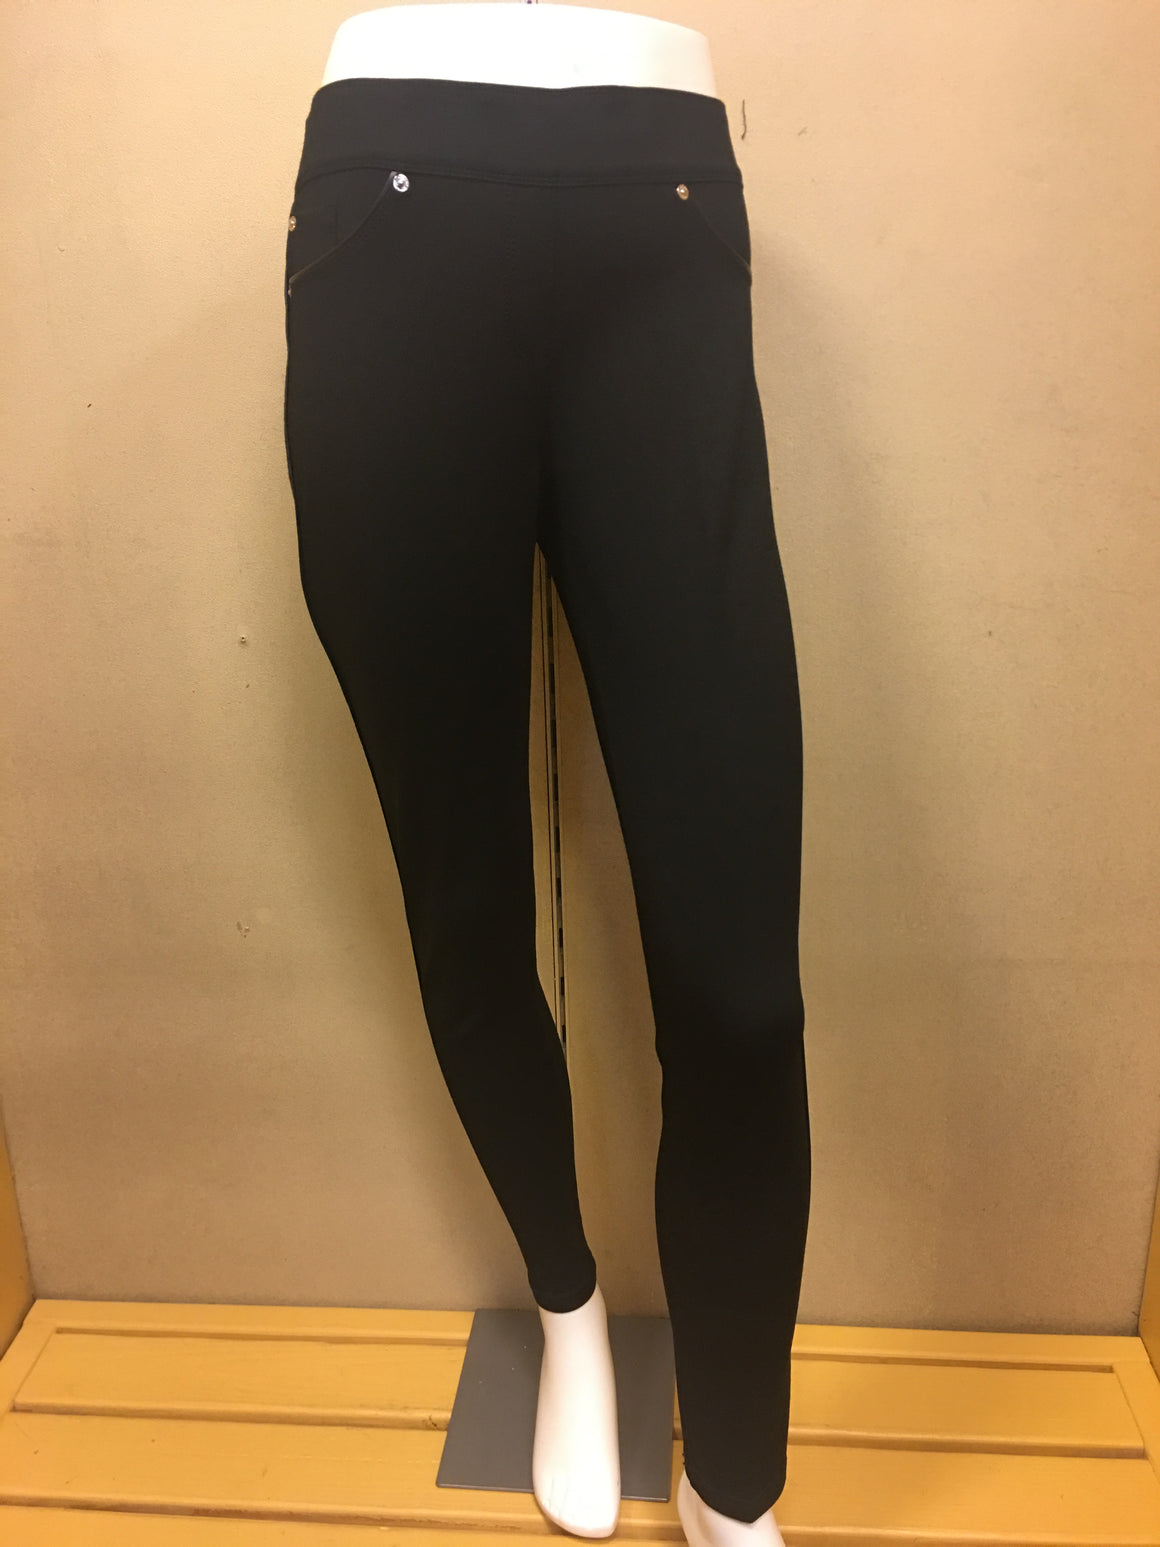 Black Leather Piped Pants